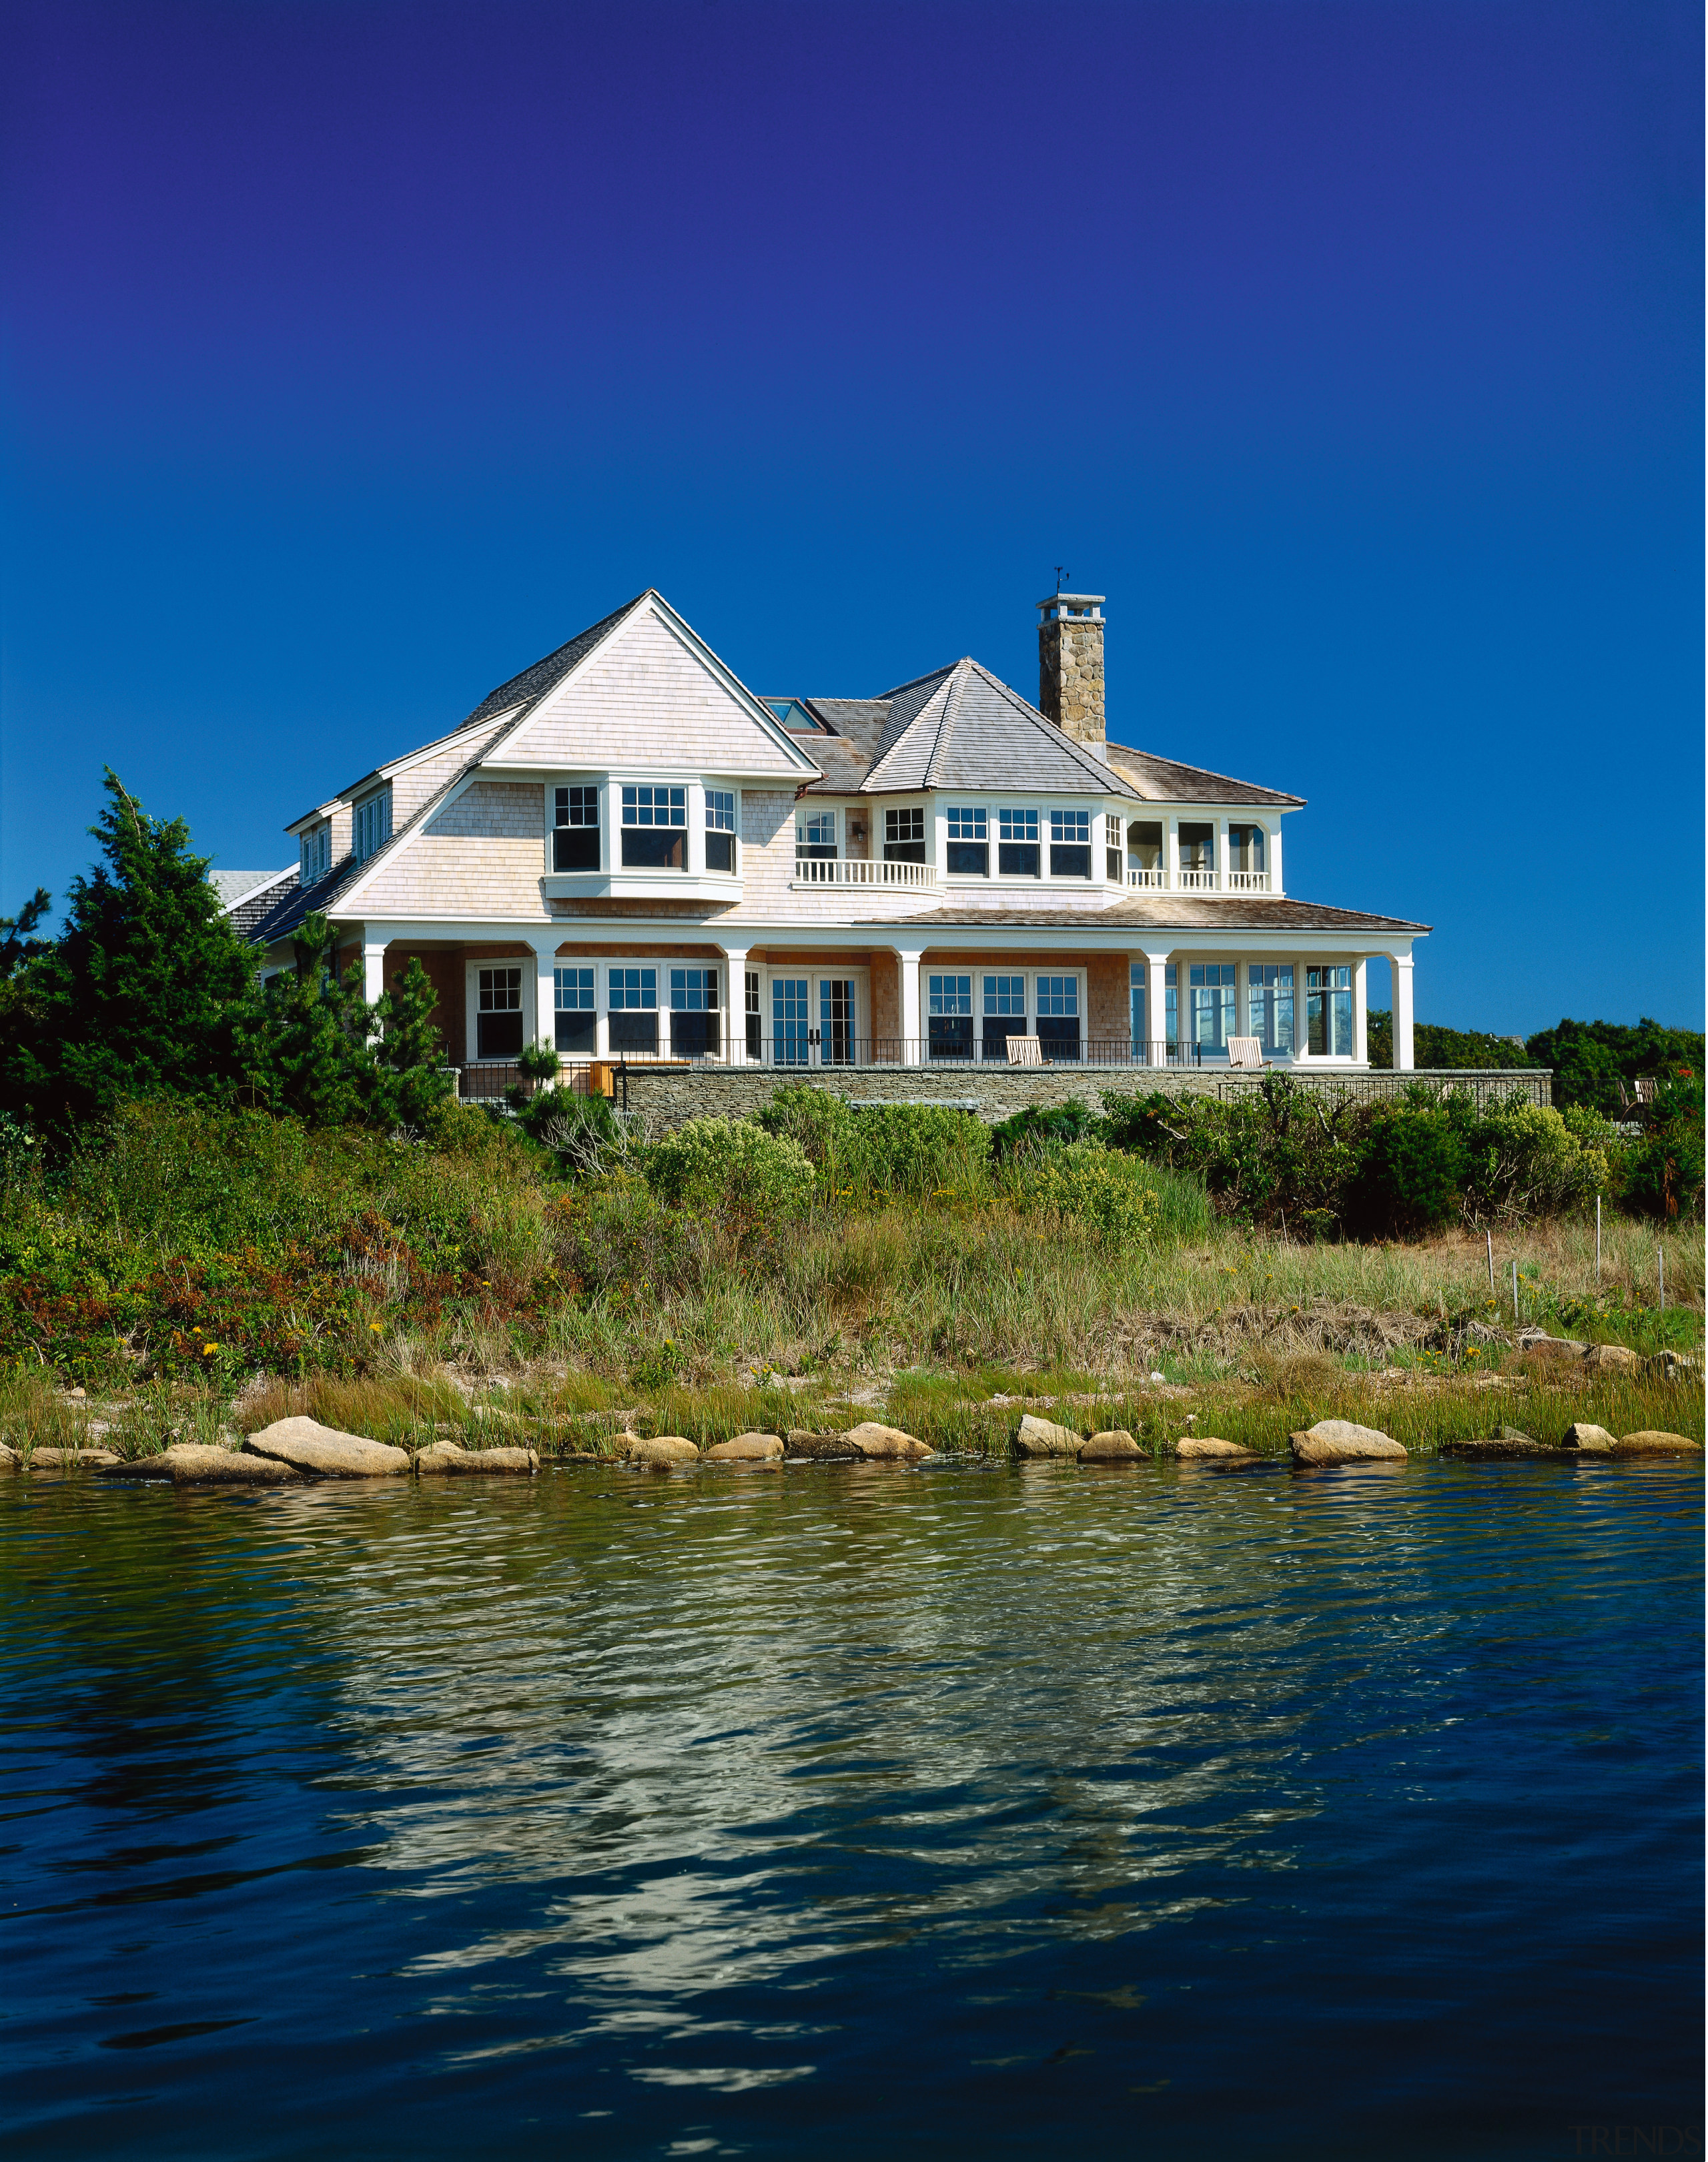 view of this cape cod home situated on building, cottage, estate, facade, home, house, lake, mansion, property, real estate, reflection, sea, sky, tree, water, waterway, blue